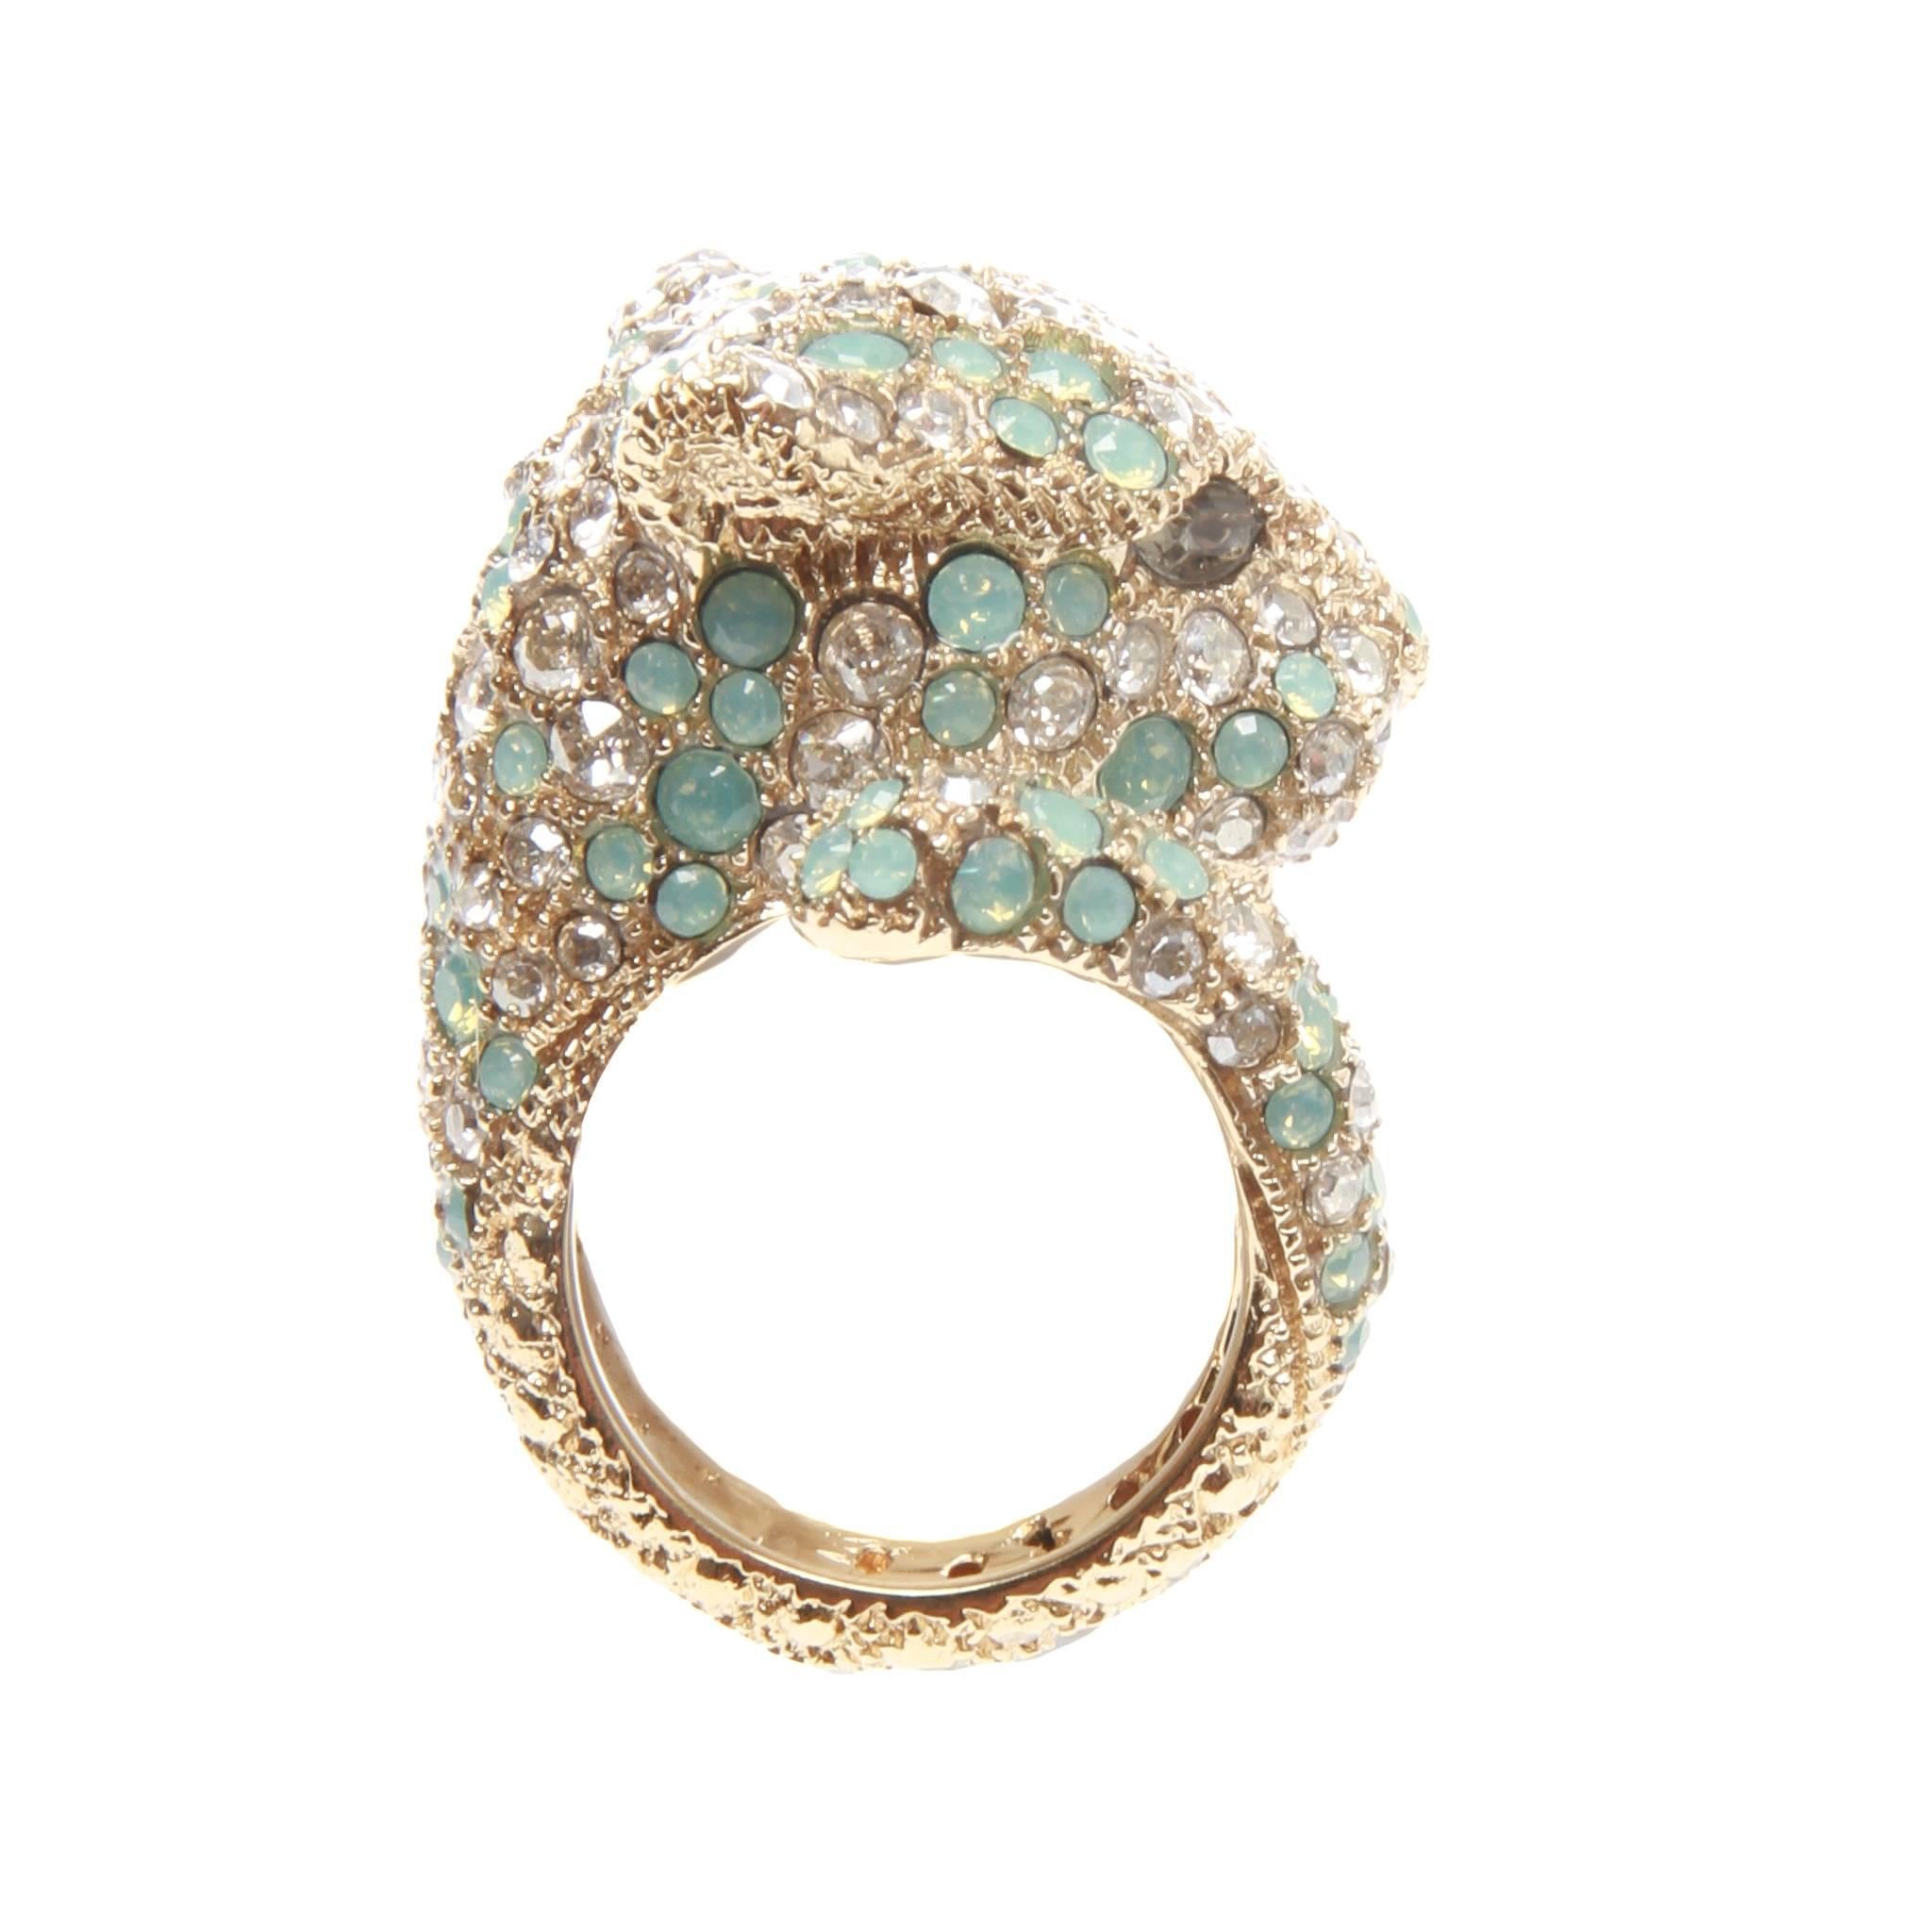 An immaculate turquoise, clear and gold plated brass and gemstone Swarovski panther ring by ROBERTO CAVALLI

Size US 7